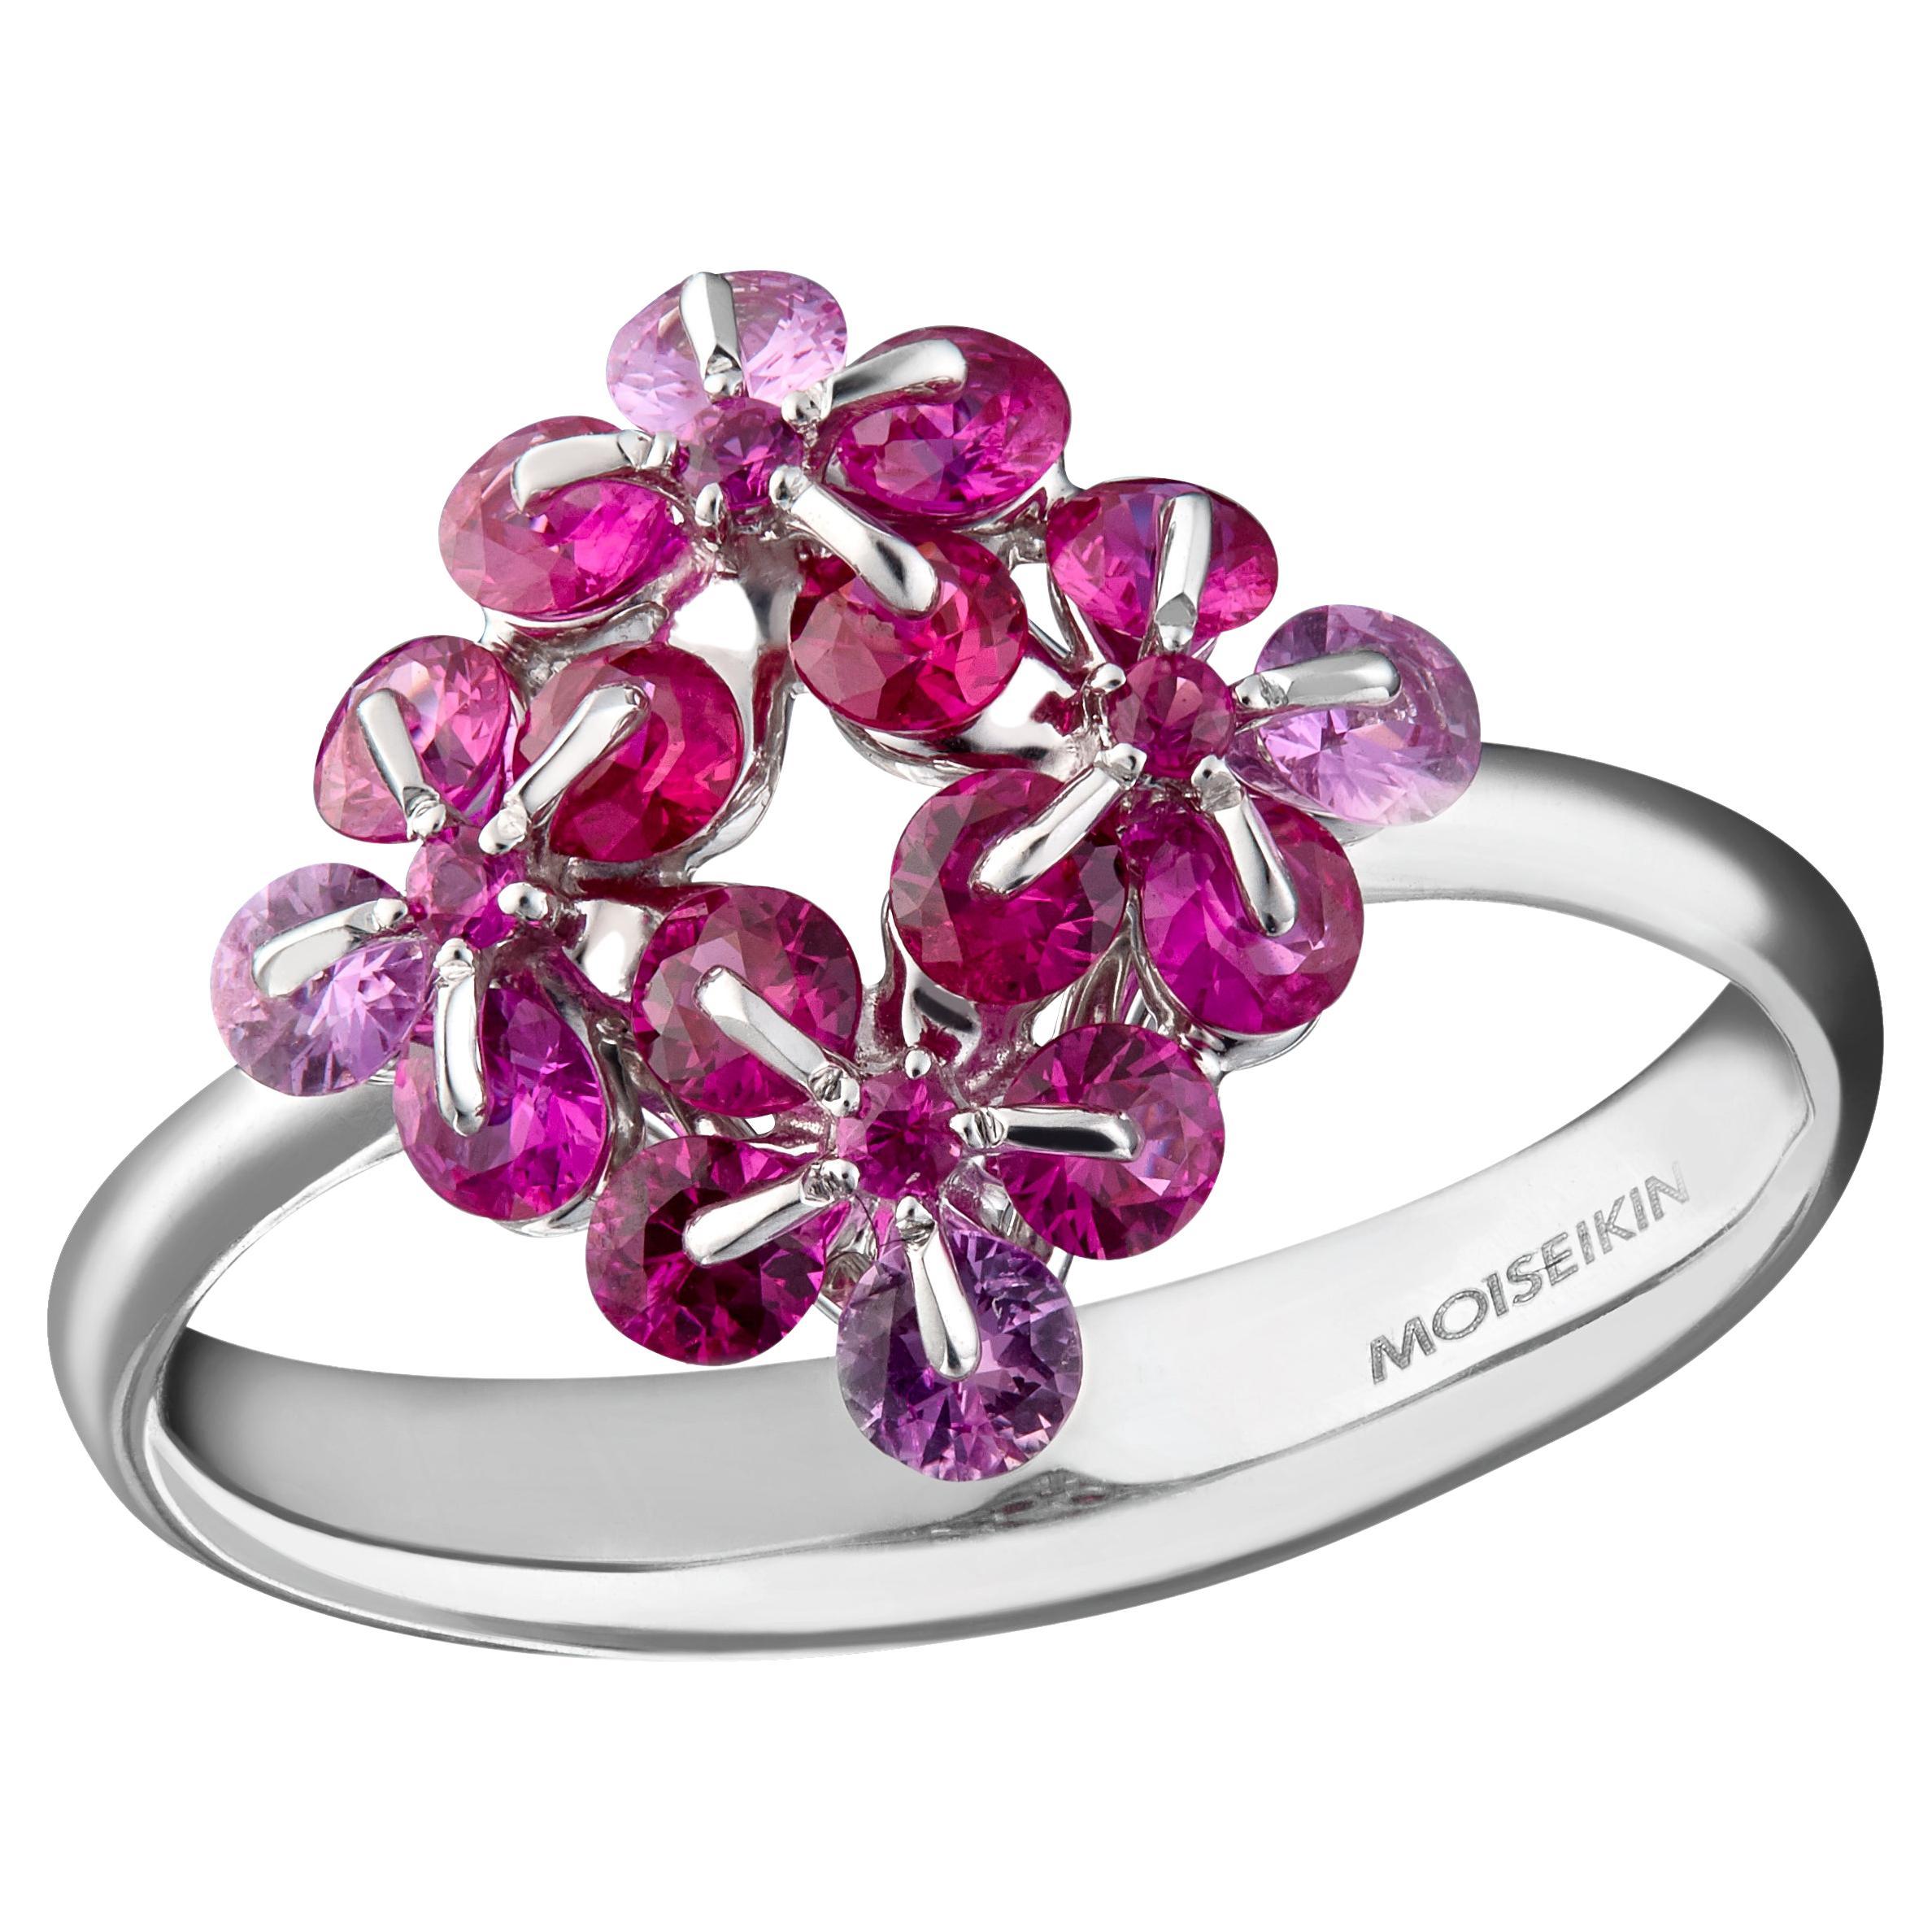 MOISEIKIN 18k White Gold Ruby and Sapphire Ring For Sale